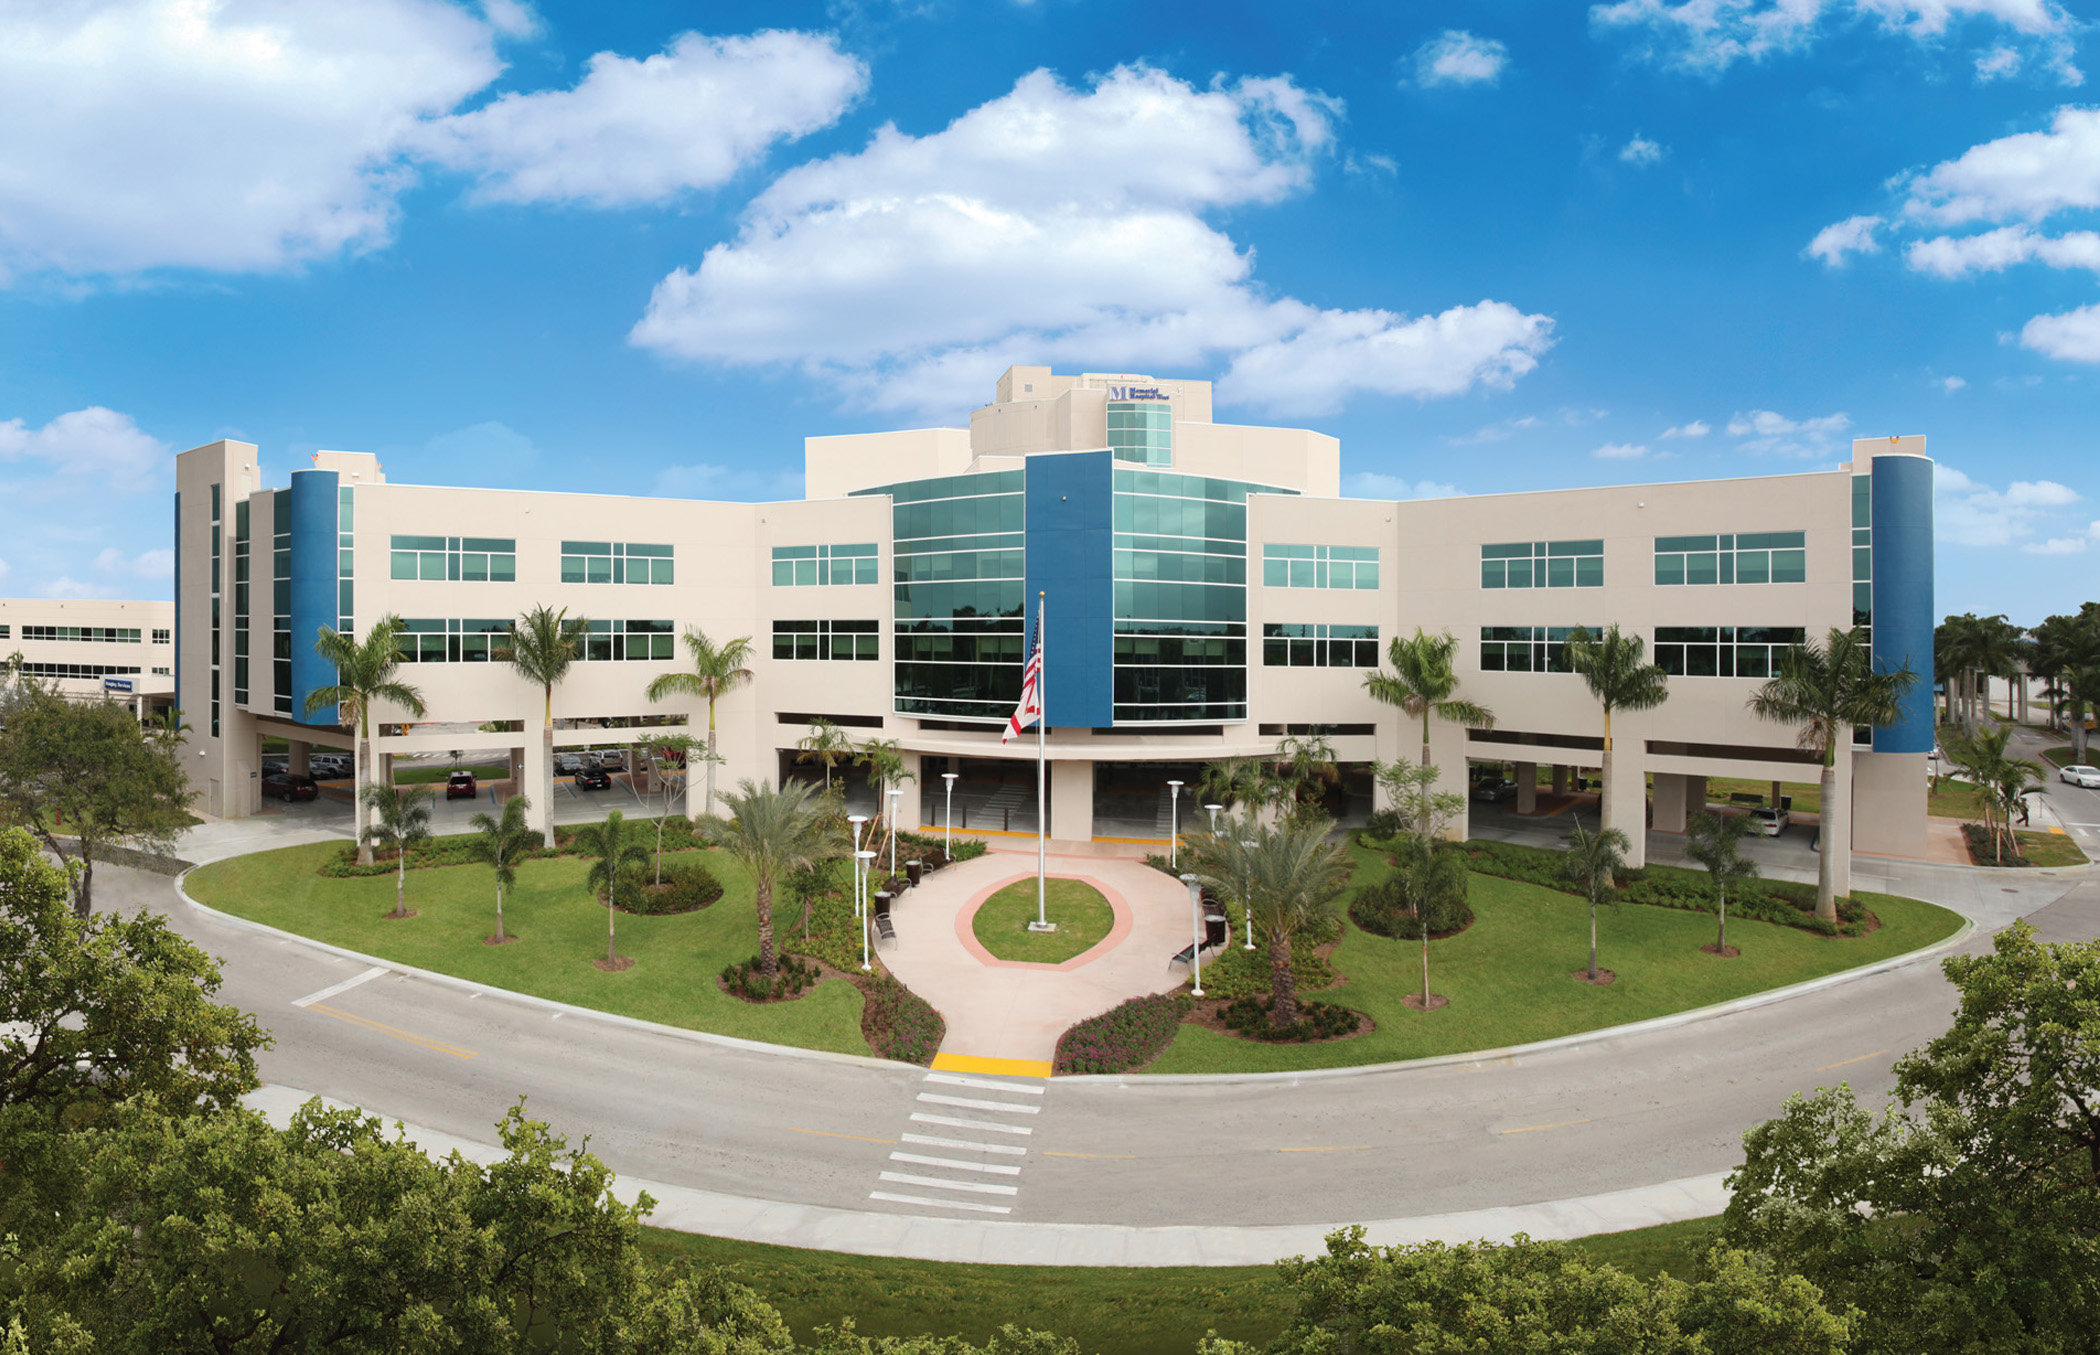 Memorial Hospital West in Pembroke Pines has been recognized as one of two Memorial Healthcare System hospitals to be ranked 2018 Best Hospitals by The Leapfrog Group.